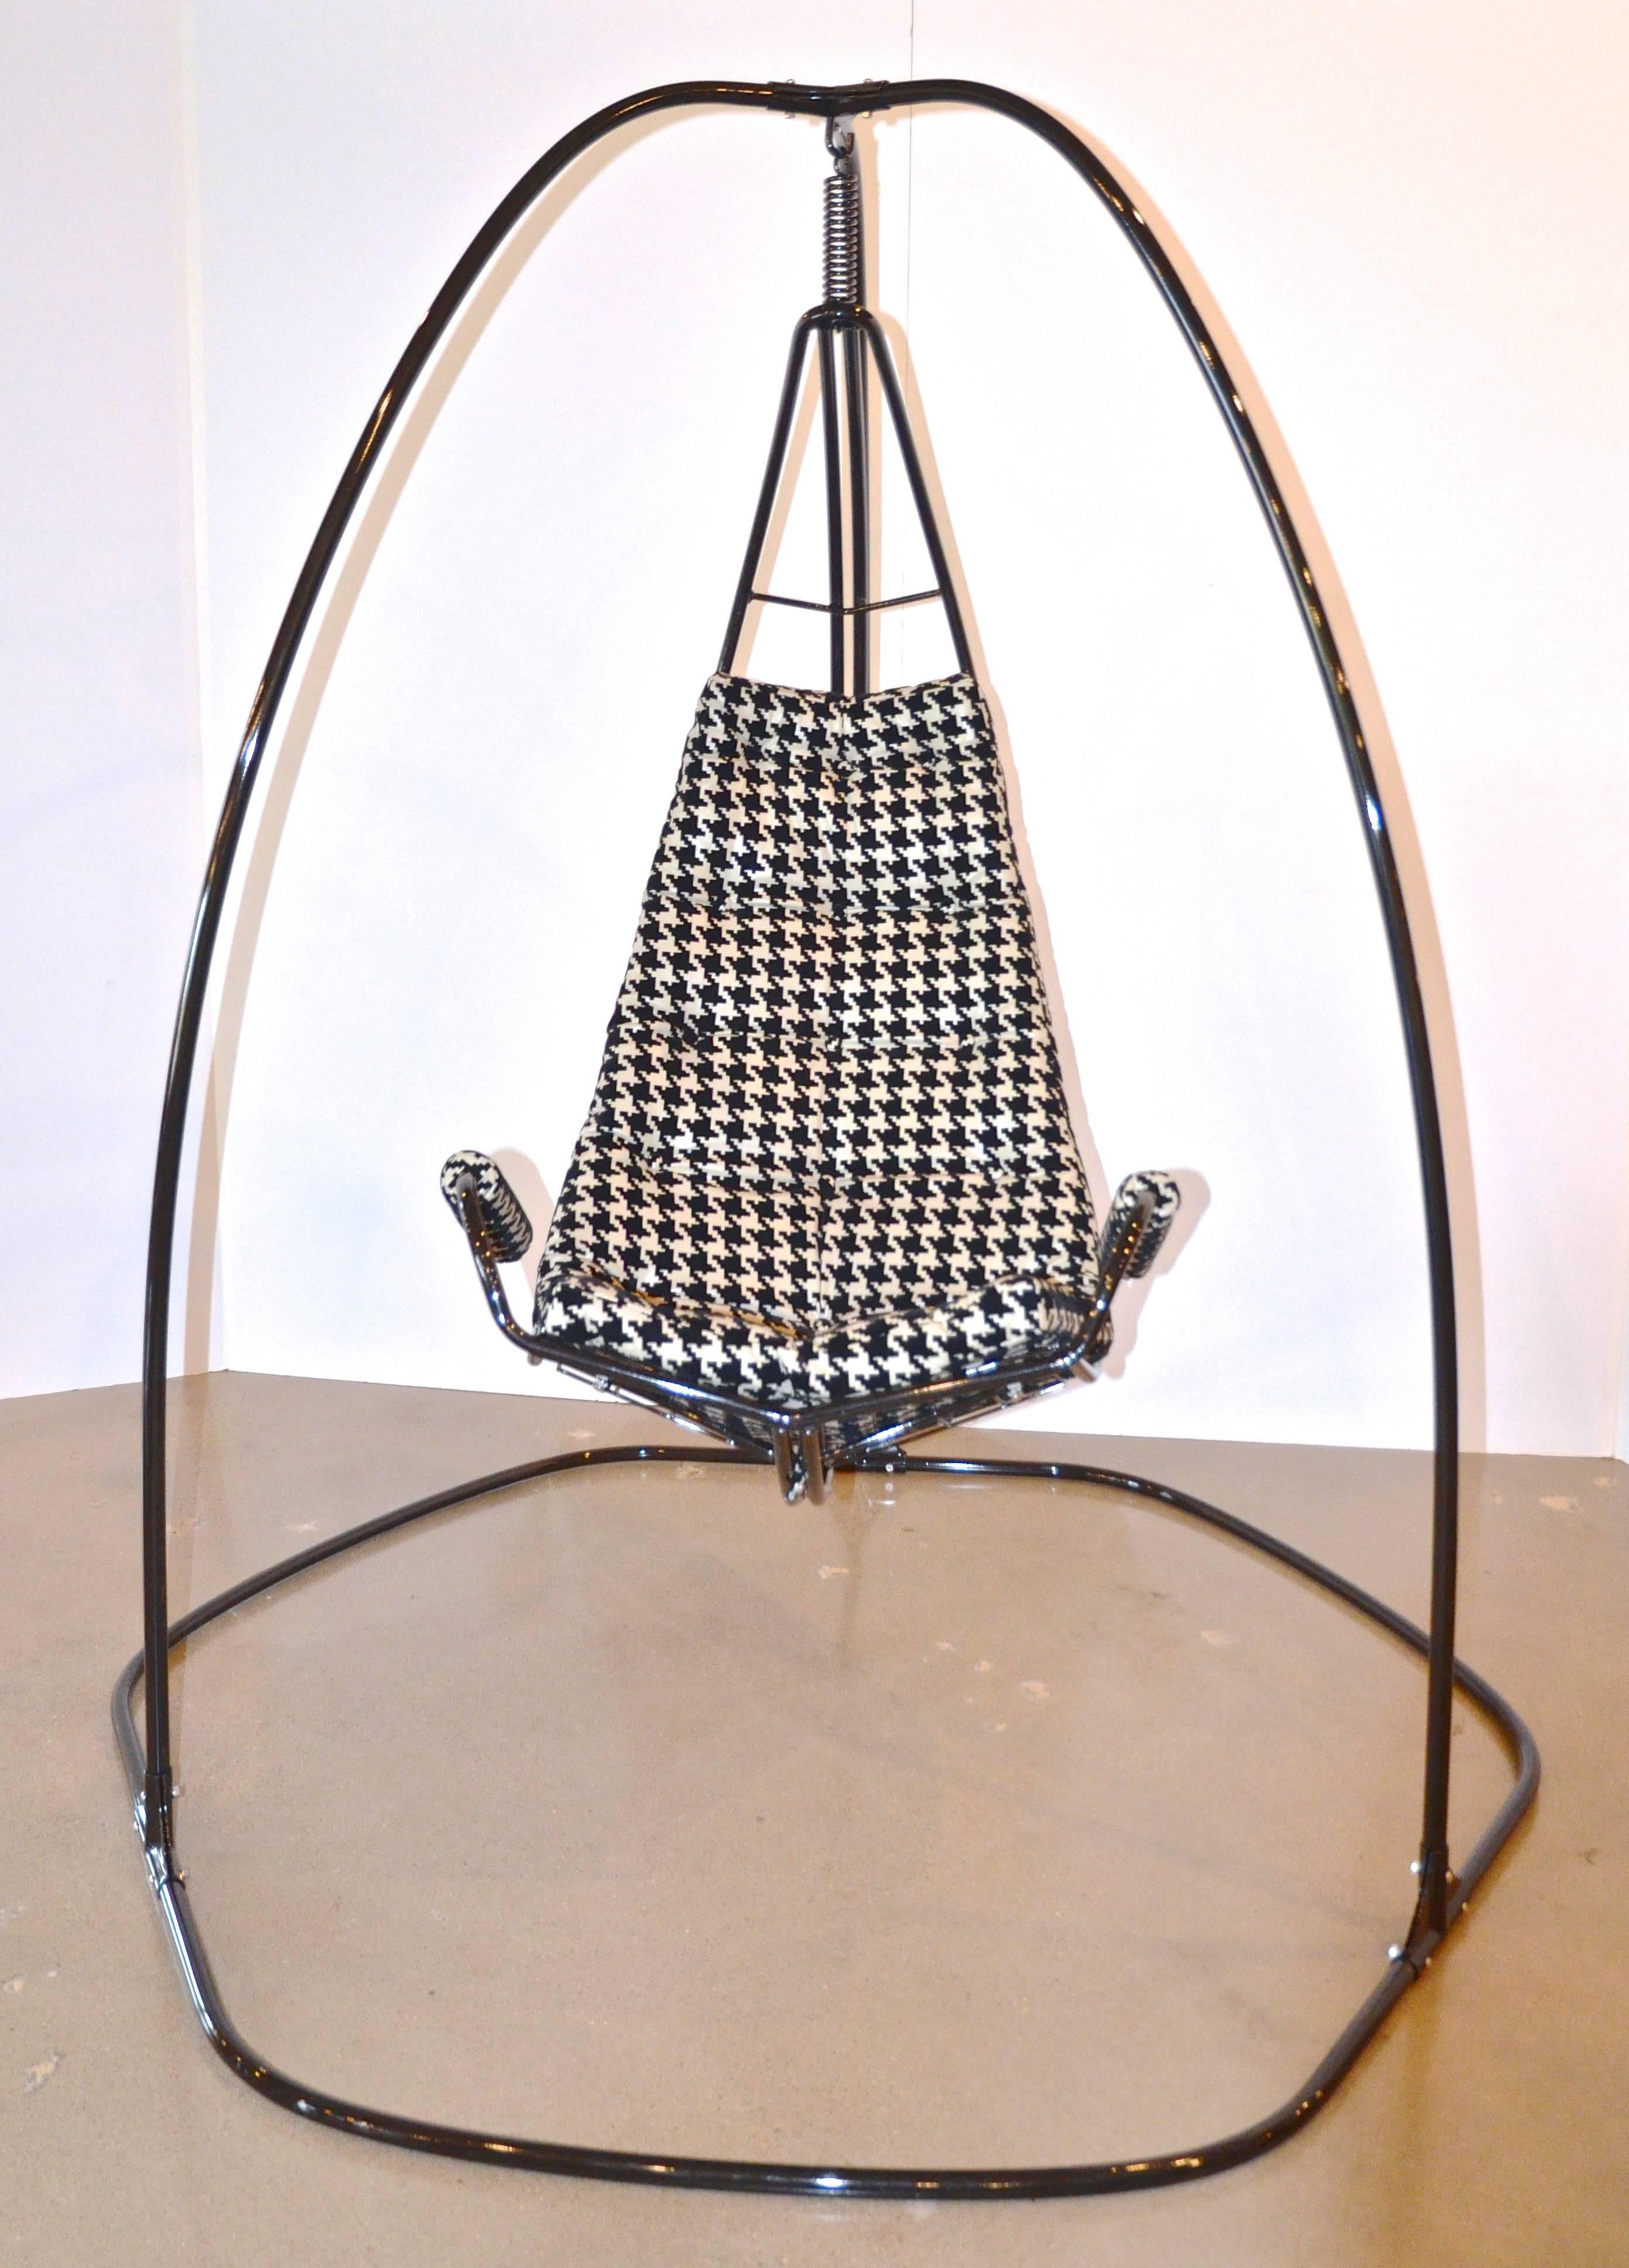 Crazy cool swing or lounge chair, fully restored, originally by Homecrest. Newly powder coated steel frame holds generous and comfortable armed chair. Newly remade cushion in large-scale flocked vinyl houndstooth of black and beige. circa 1970.